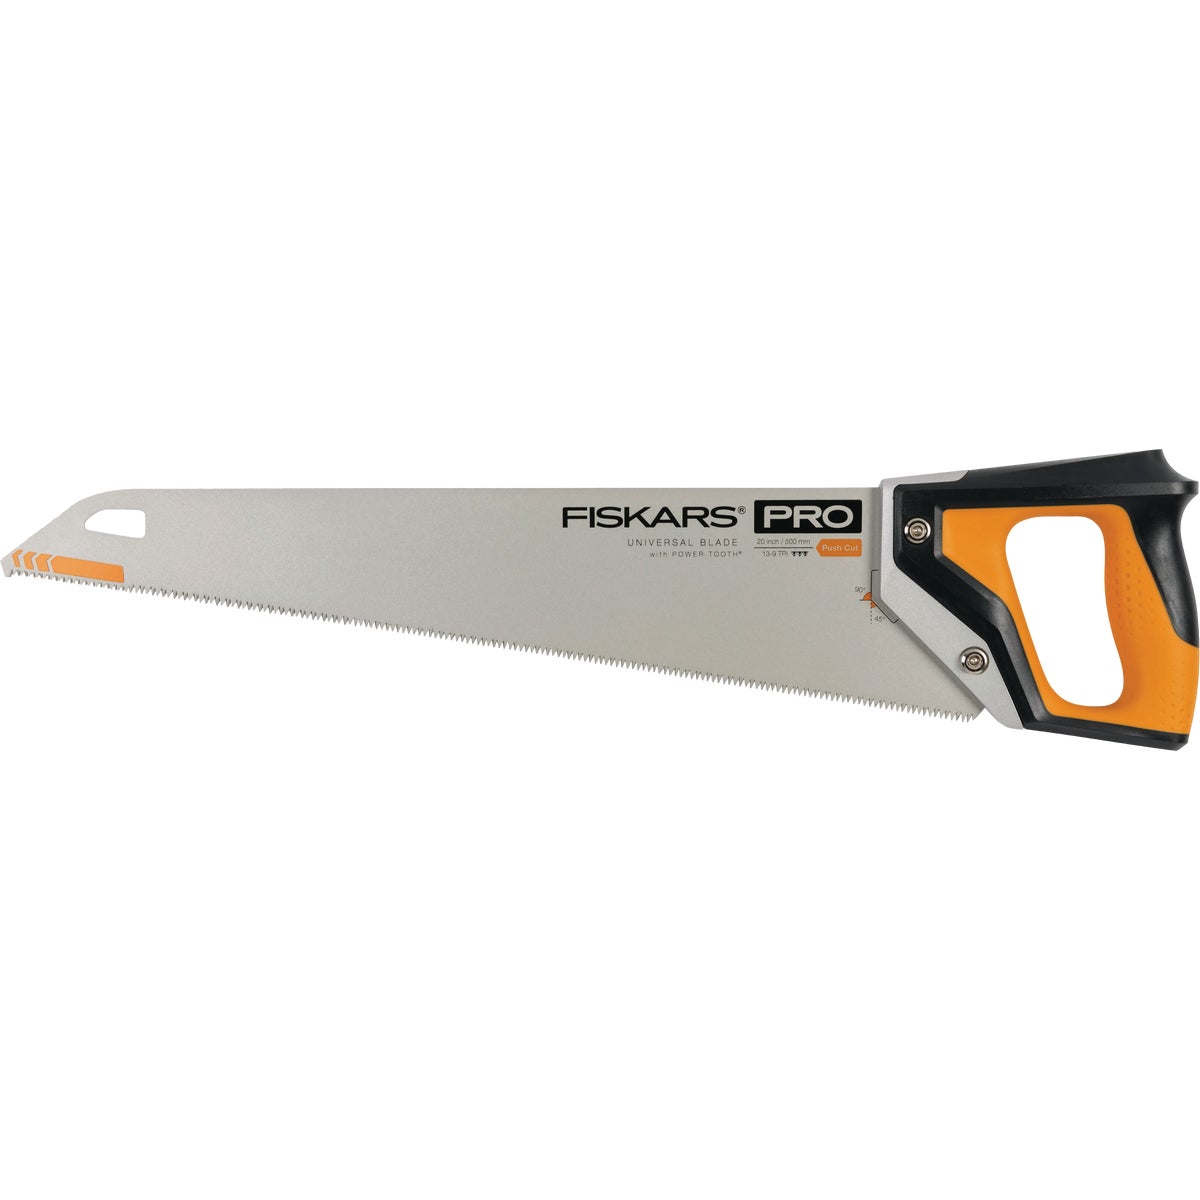 Fiskars Pro POWER TOOTH 20 In. L Blade Metal Handle Hand Saw with Sheath